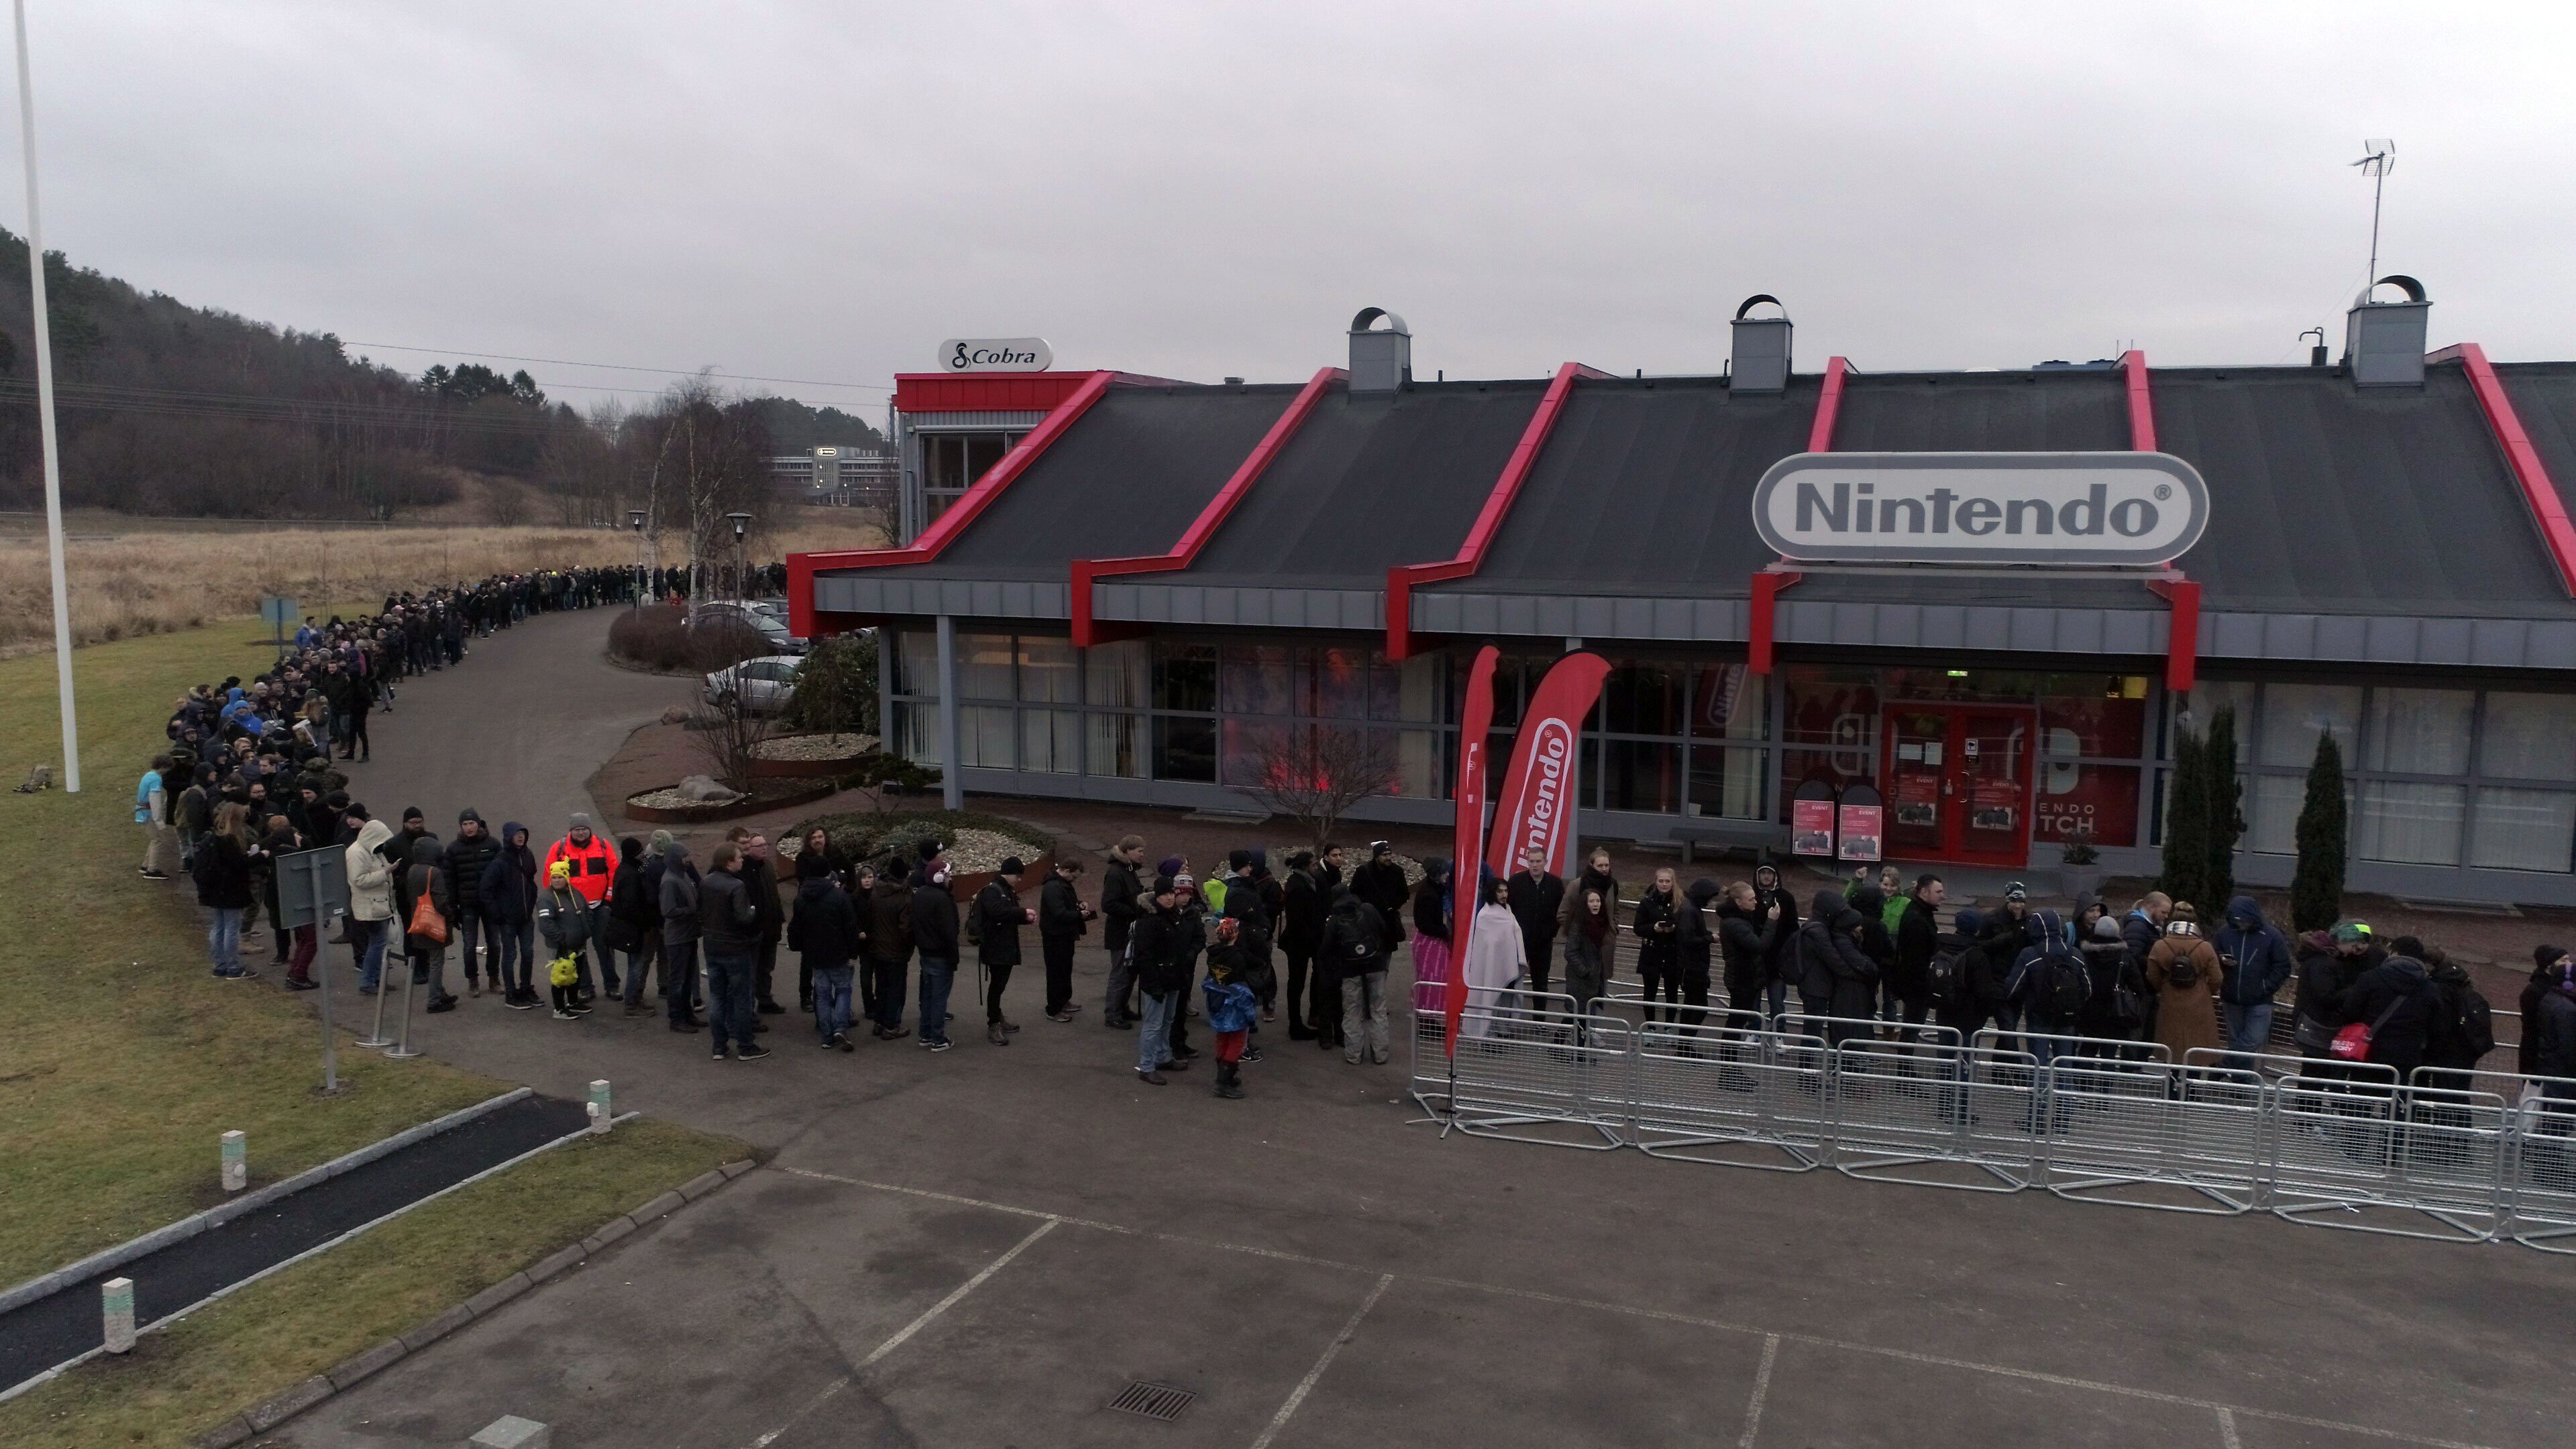 snack respons forberede Gunnar Johansson ⭐ ar Twitter: "Meanwhile in Kungsbacka. The line for  playing Nintendo Switch at @Bergsala today. #nintendoswitch #nintendo  @ToadForever https://t.co/rpH93ityfe" / Twitter